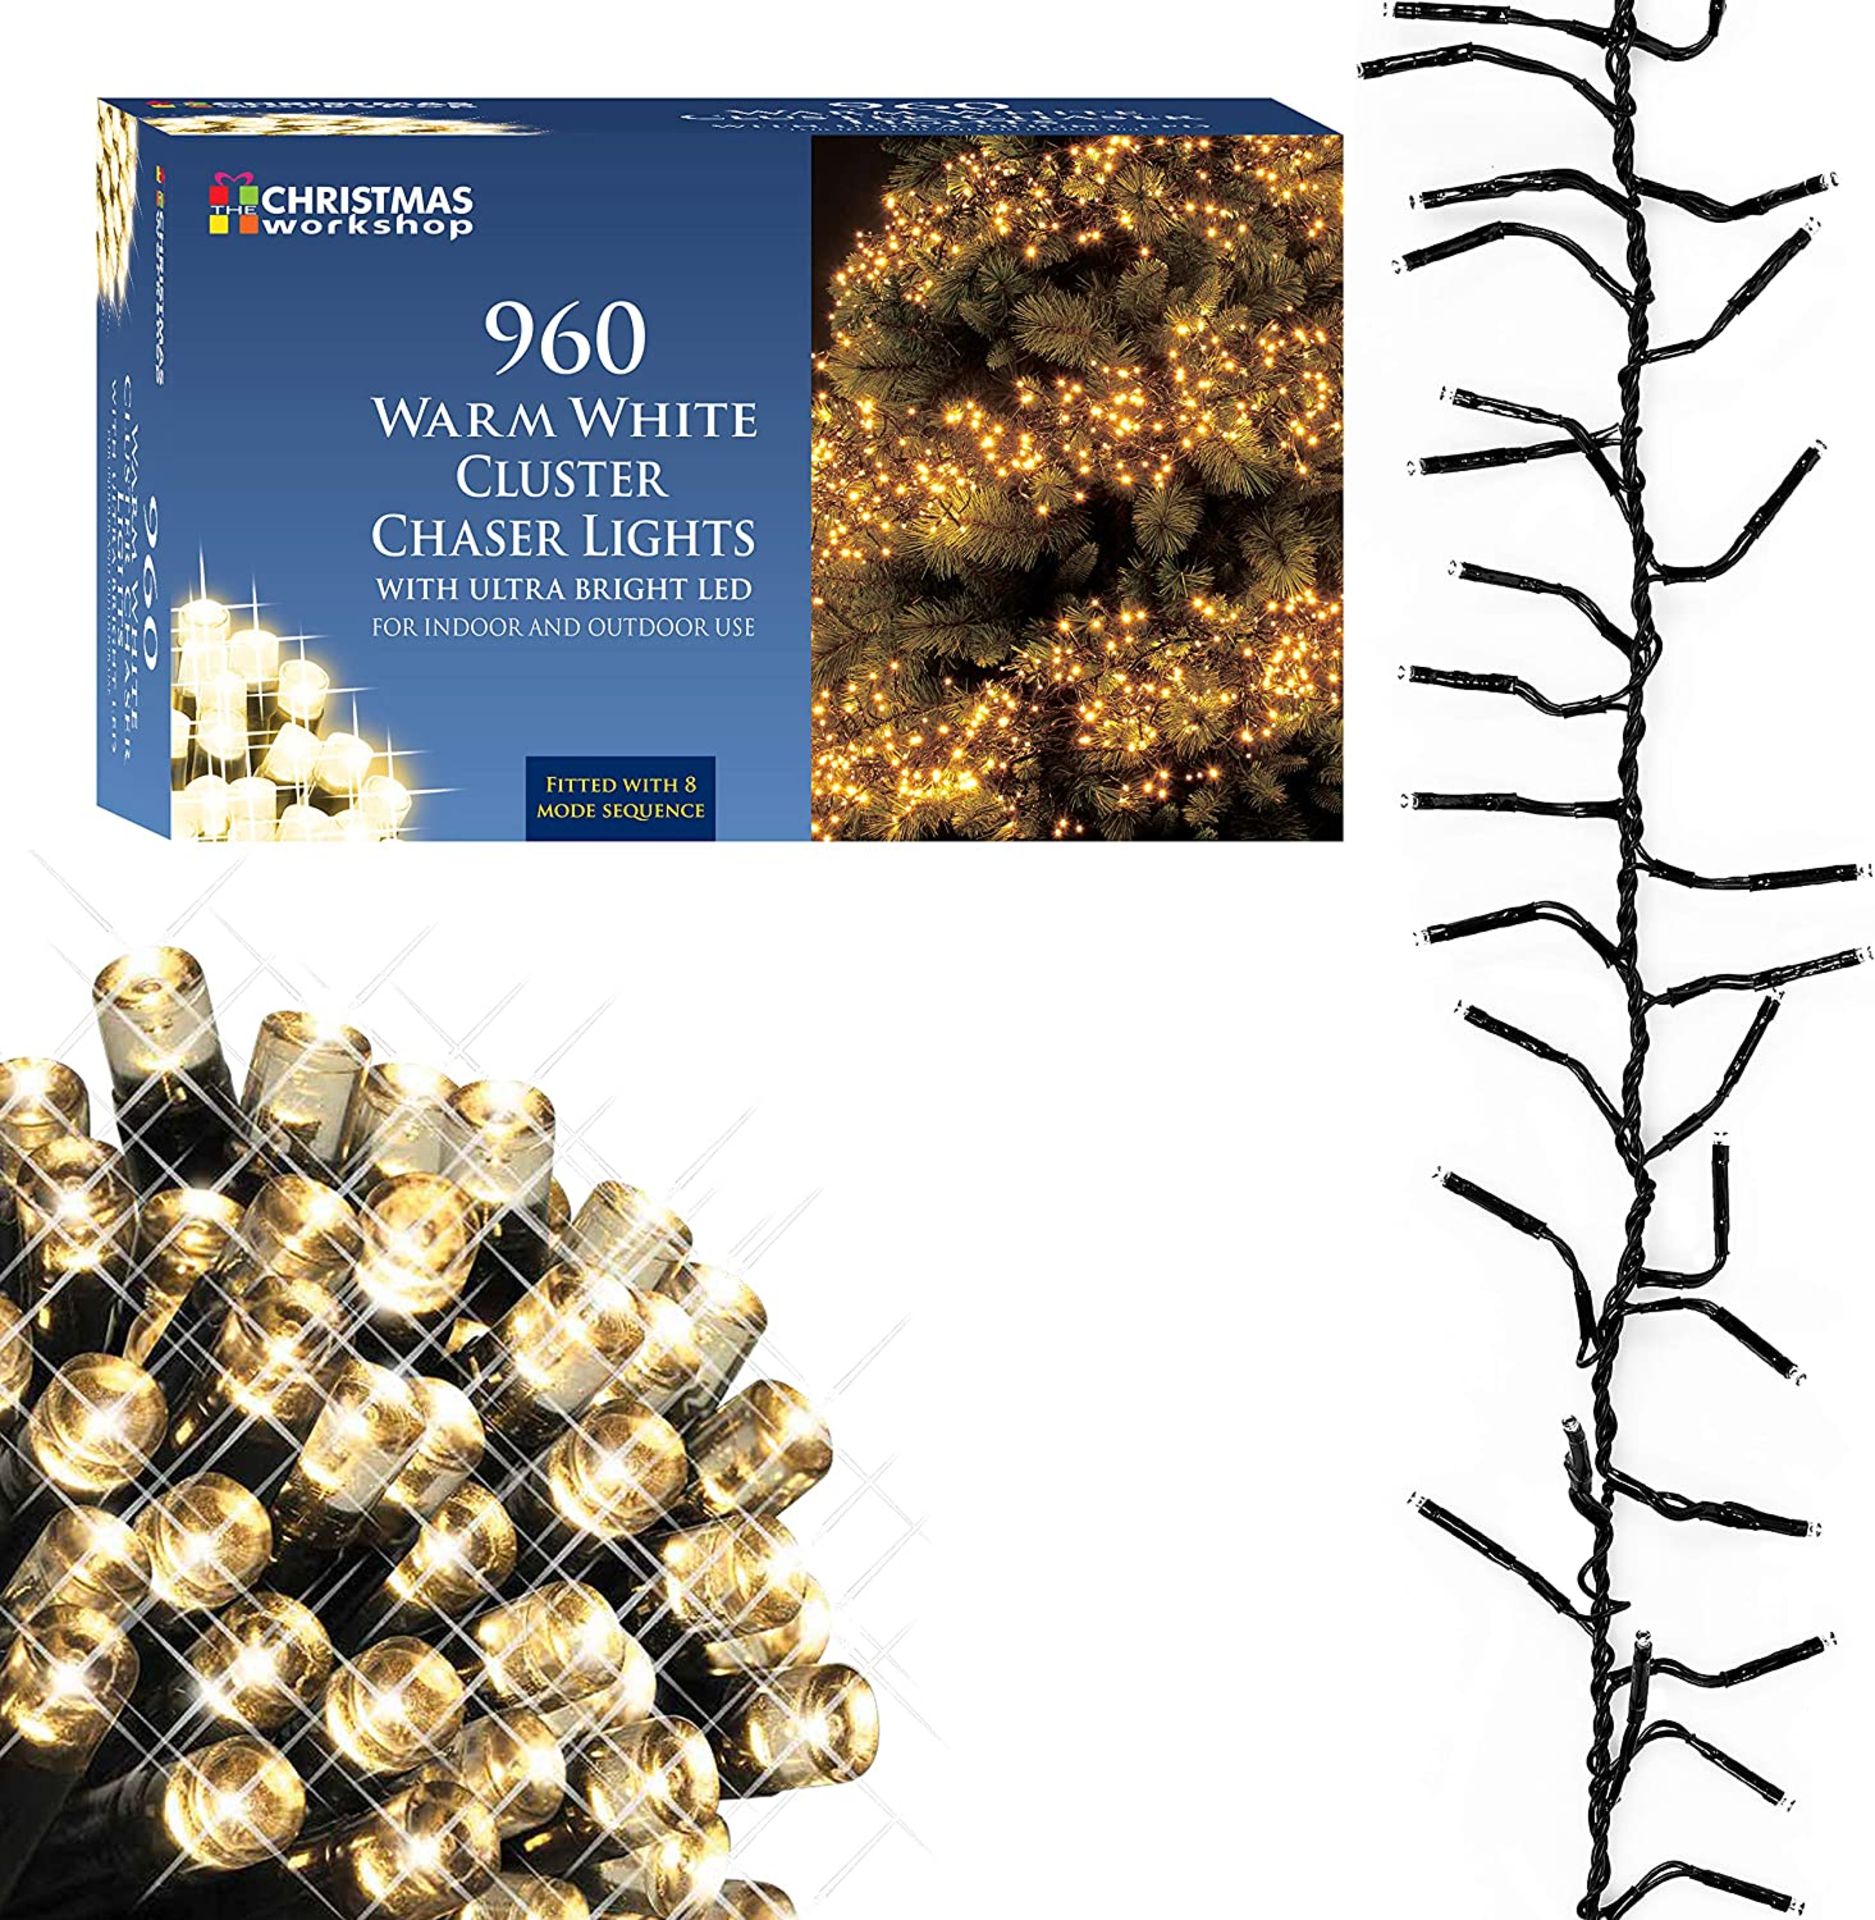 The Christmas Workshop 71820 960 Warm White LED Chaser Cluster Christmas Lights | Indoor and Outdoor